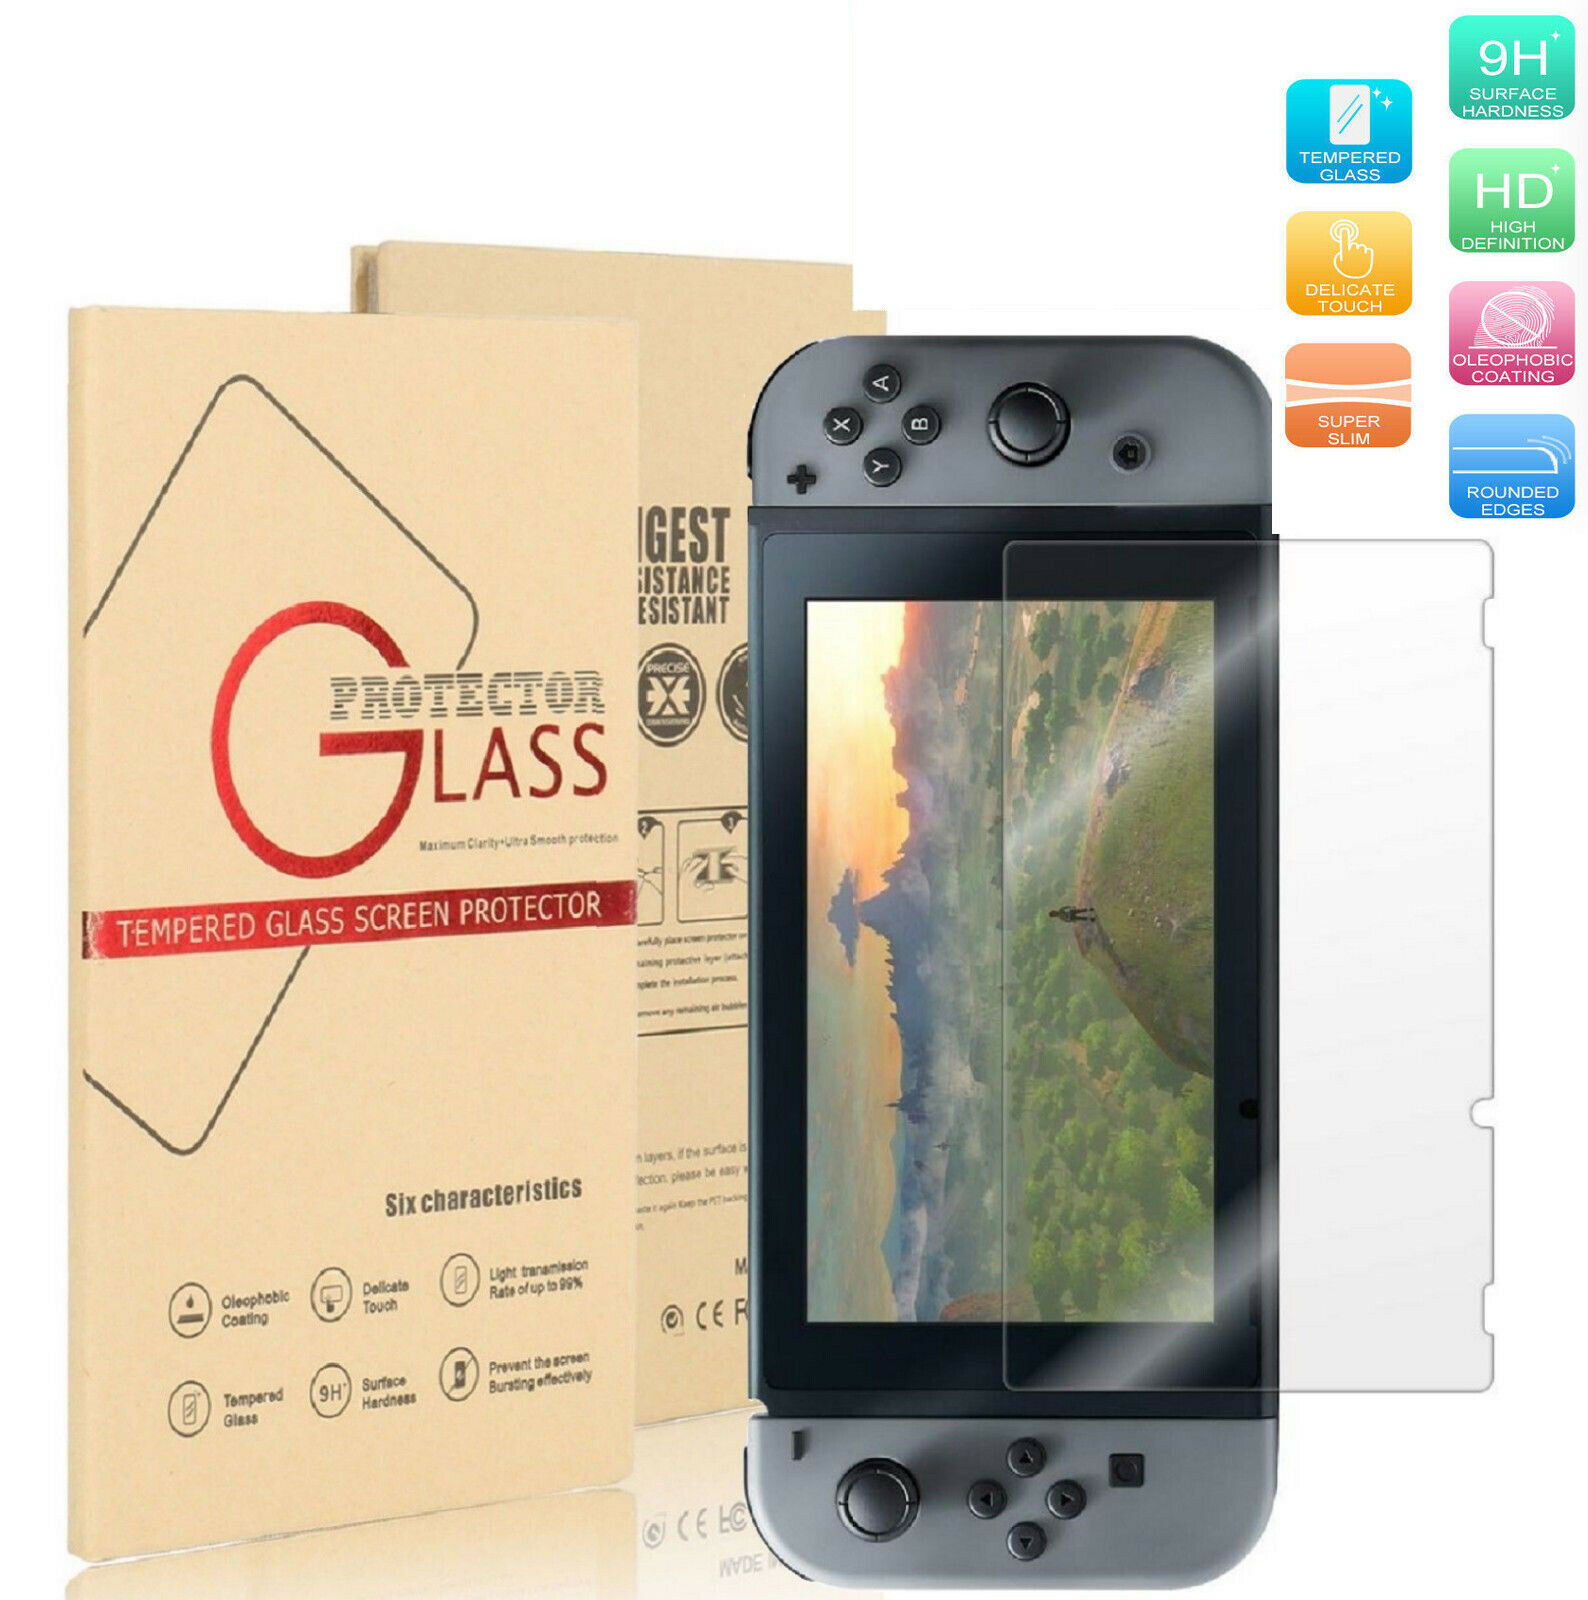 9h+ Nintendo Switch Ultra Clear Slim Premium Tempered Glass Screen Protector Usa